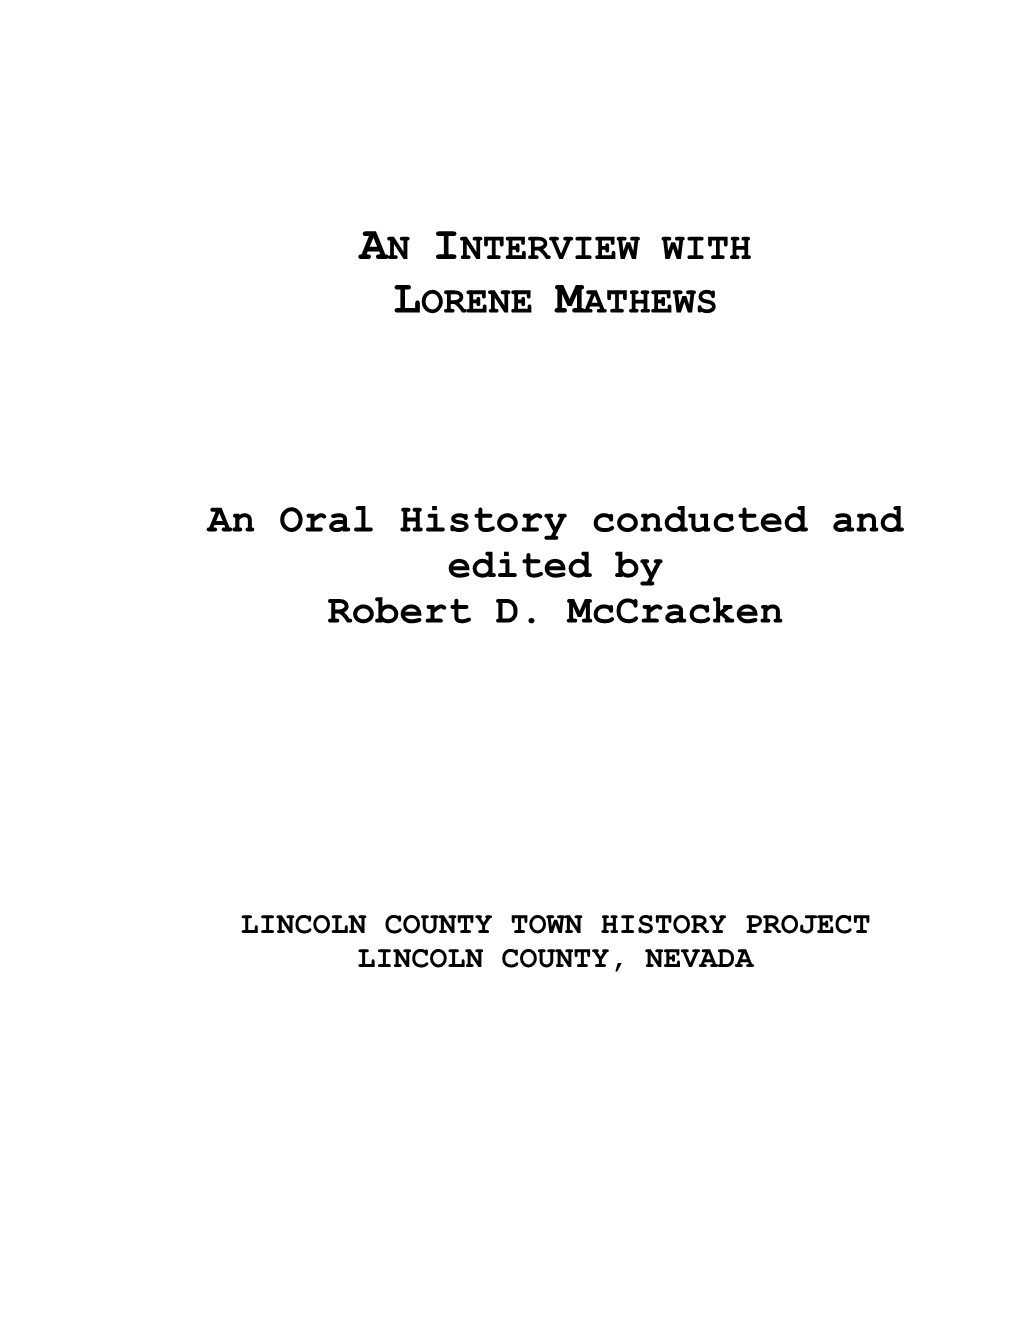 An Oral History Conducted and Edited by Robert D. Mccracken